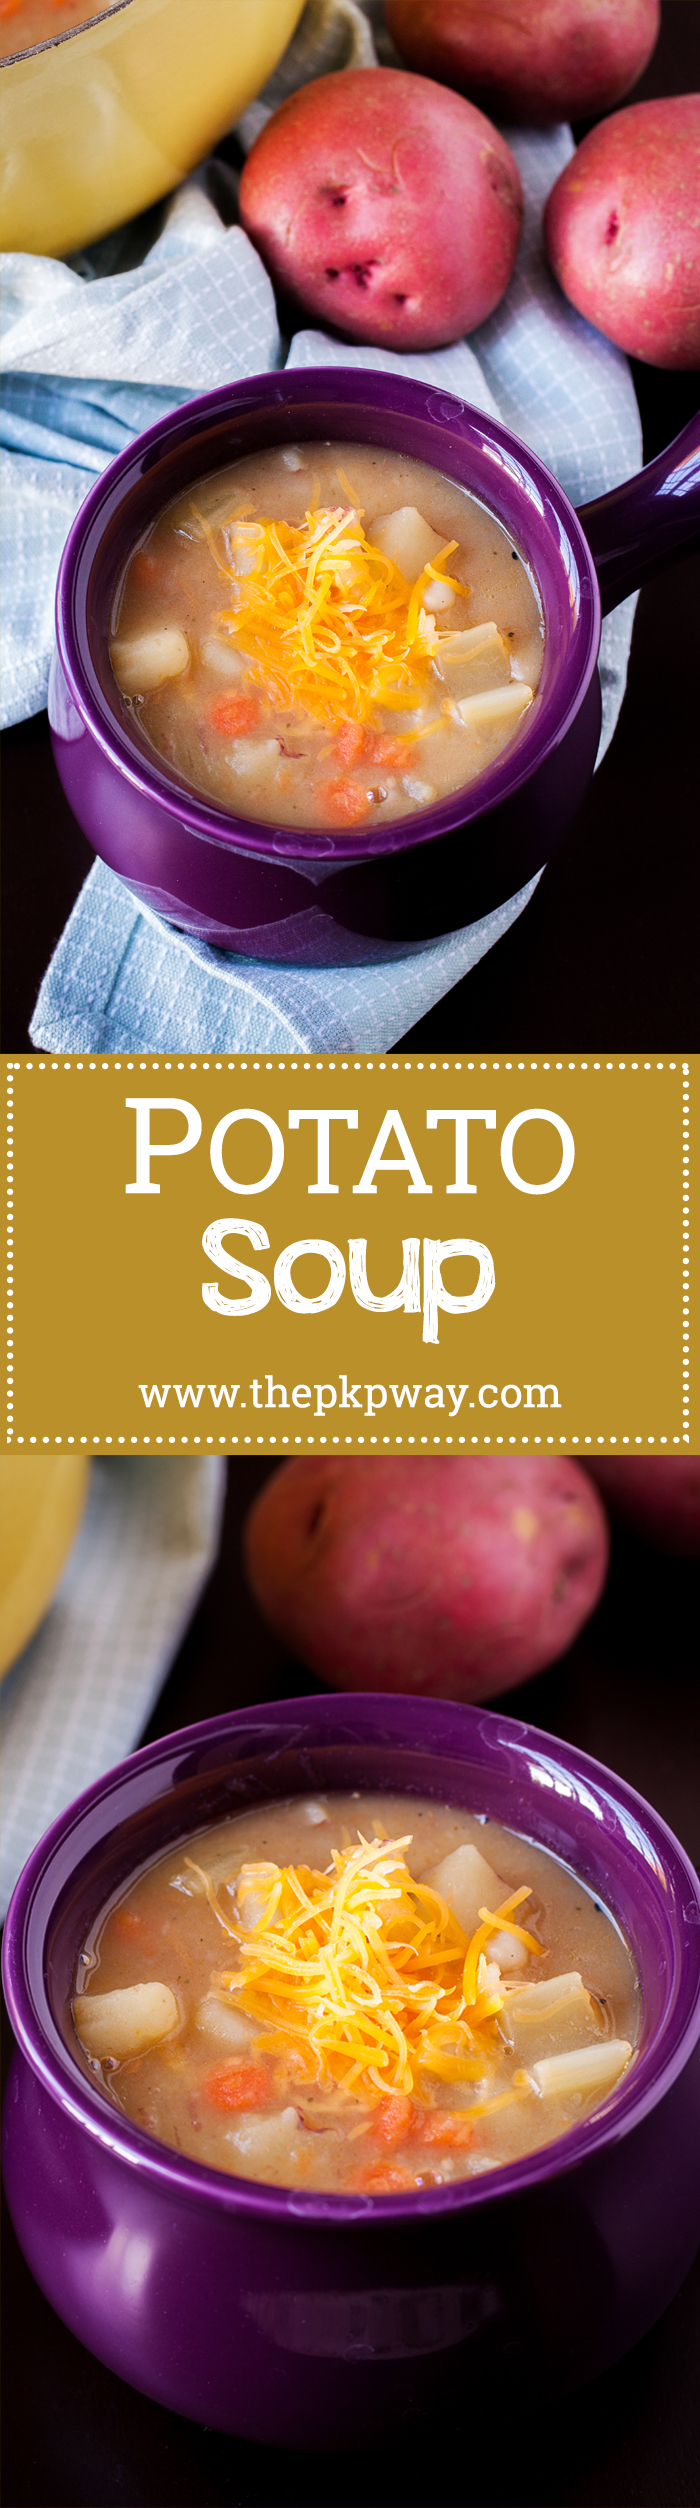 This potato soup will warm and nourish your insides!